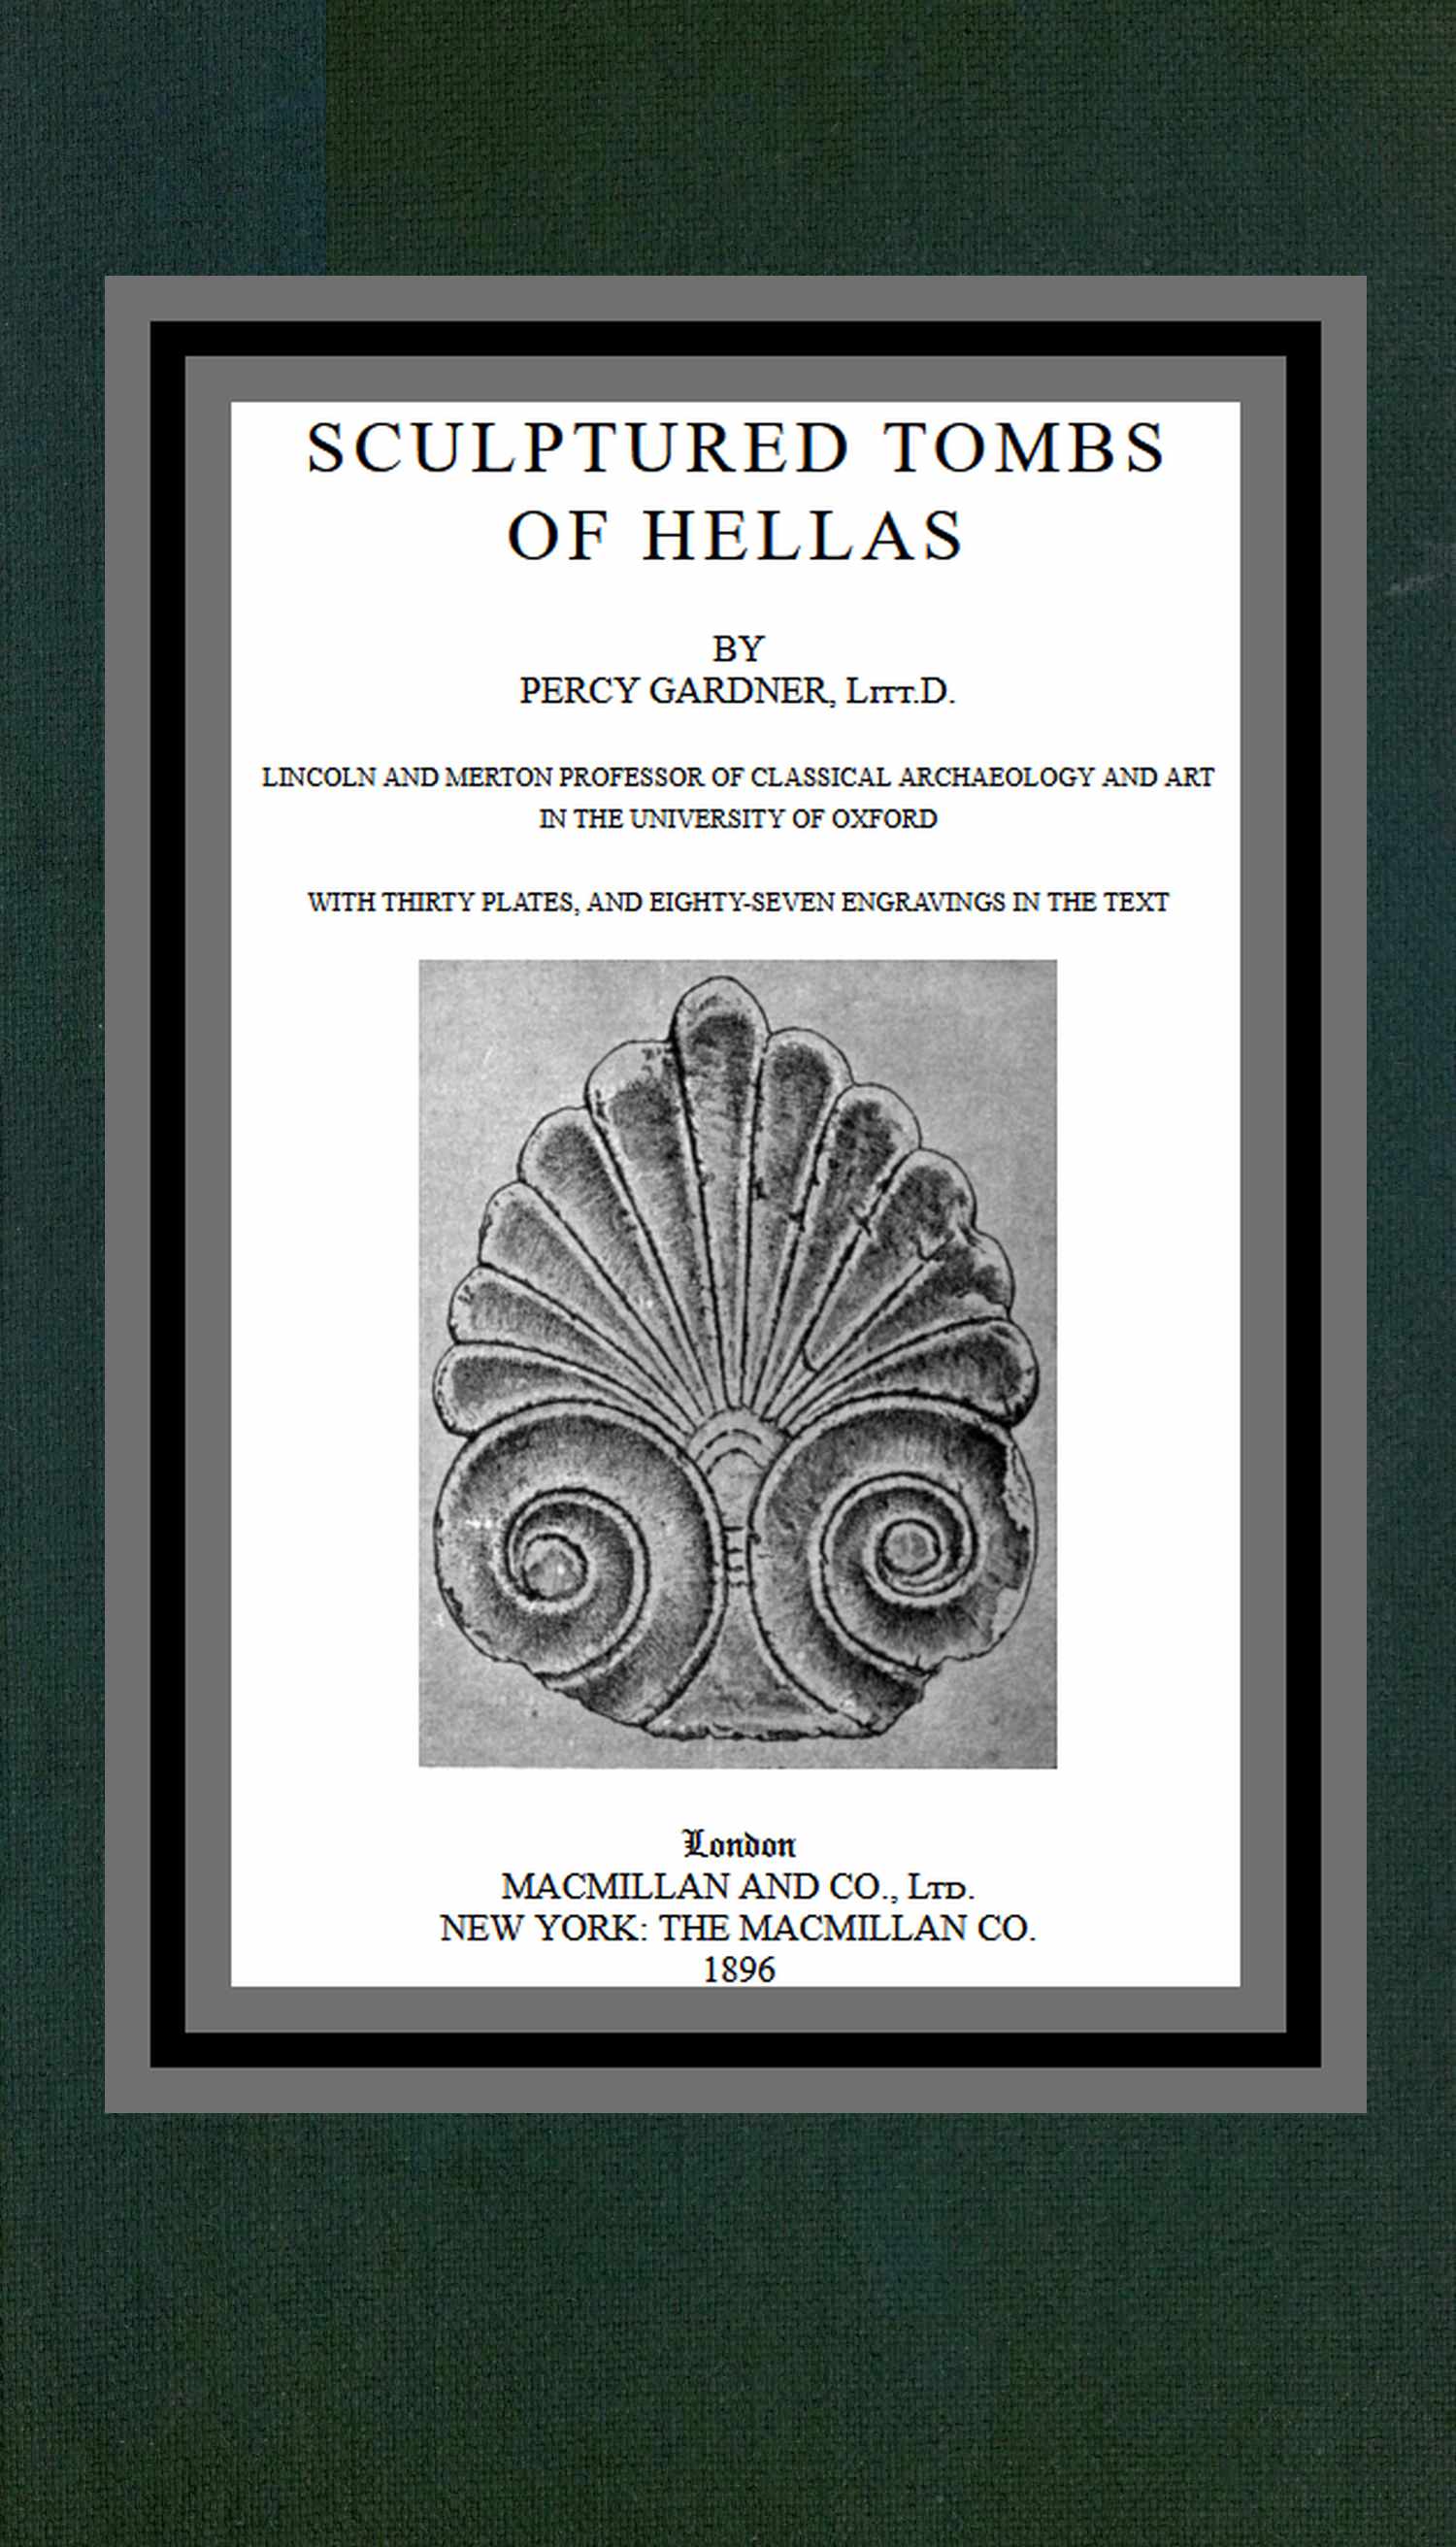 The Project Gutenberg eBook of Sculptured tombs of Hellas, by Percy Gardner. picture